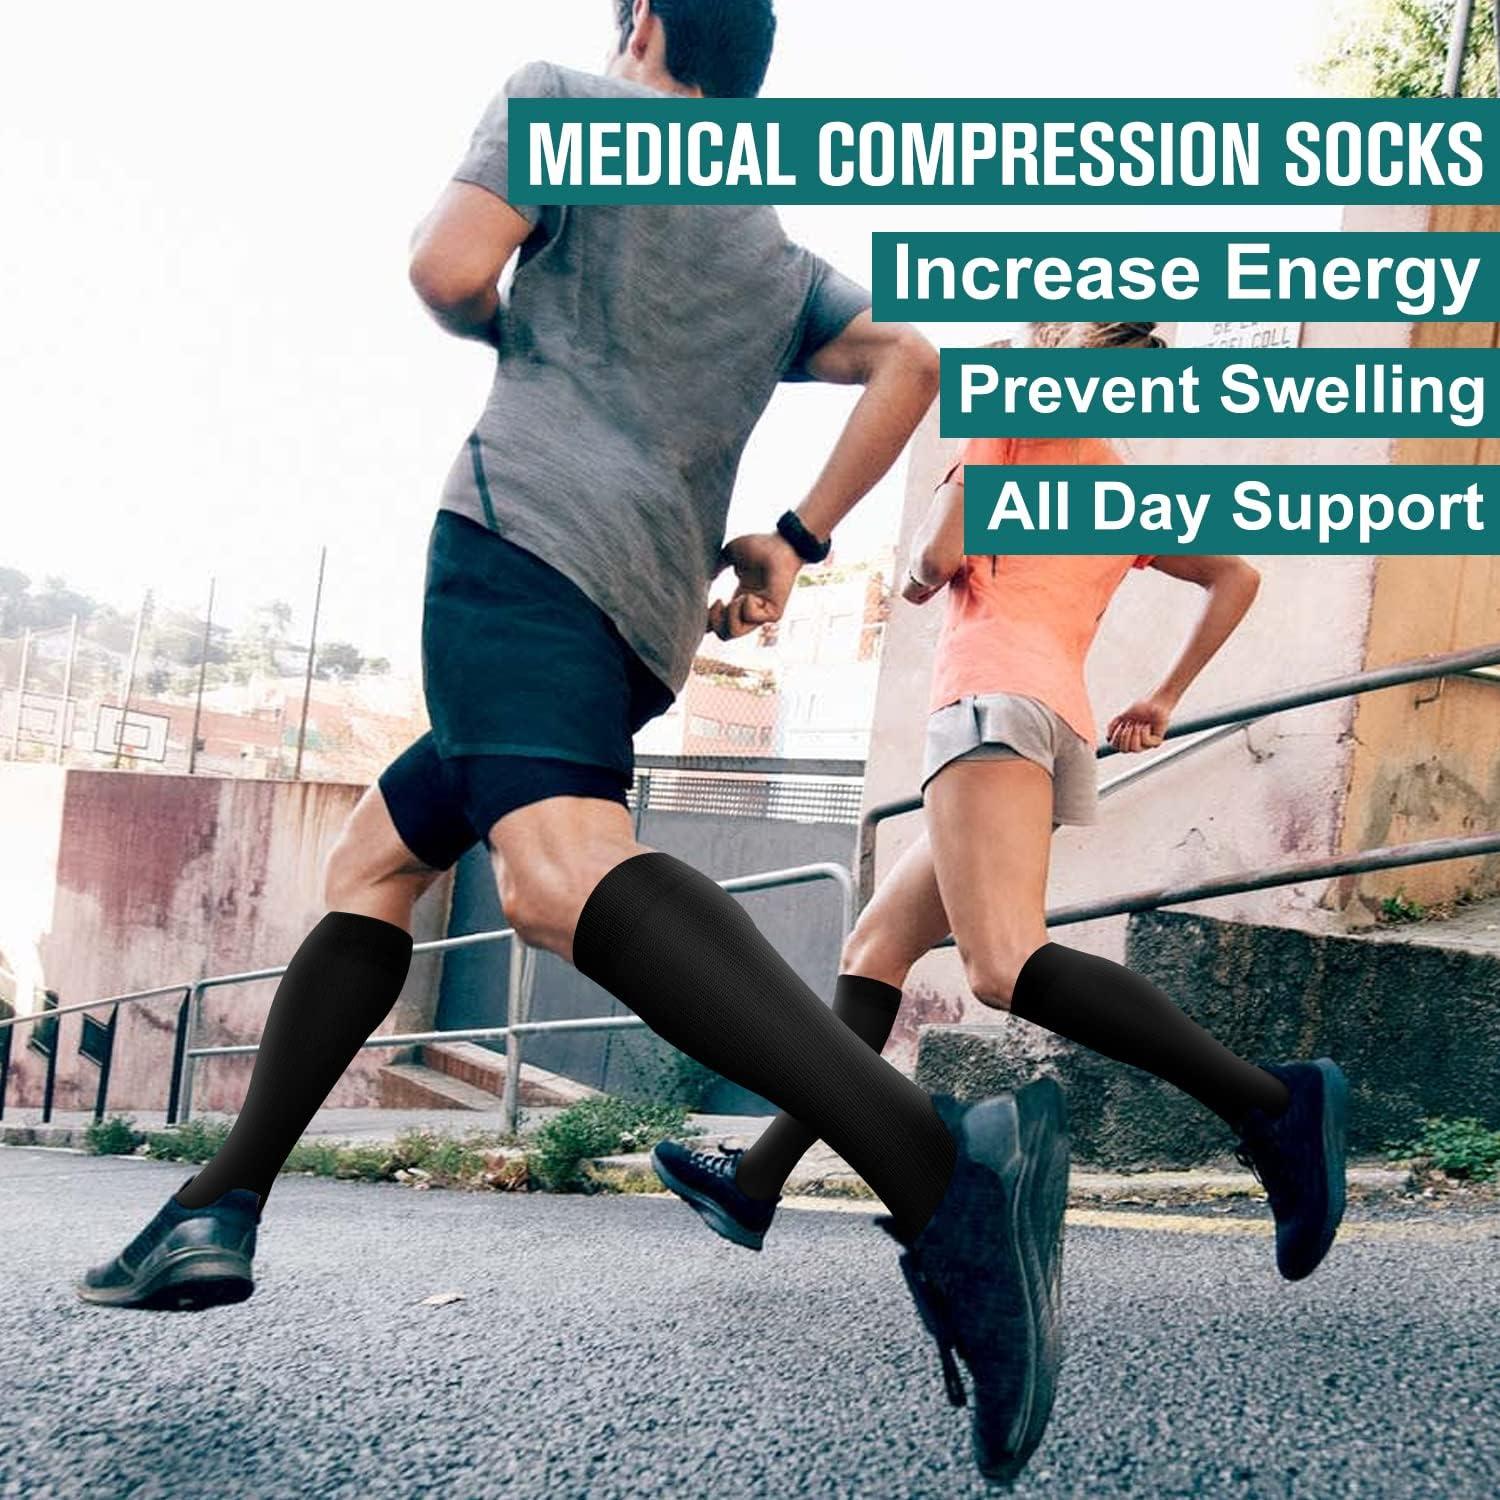 Compression Socks,(3 Pairs) Compression Sock Women and Men Best